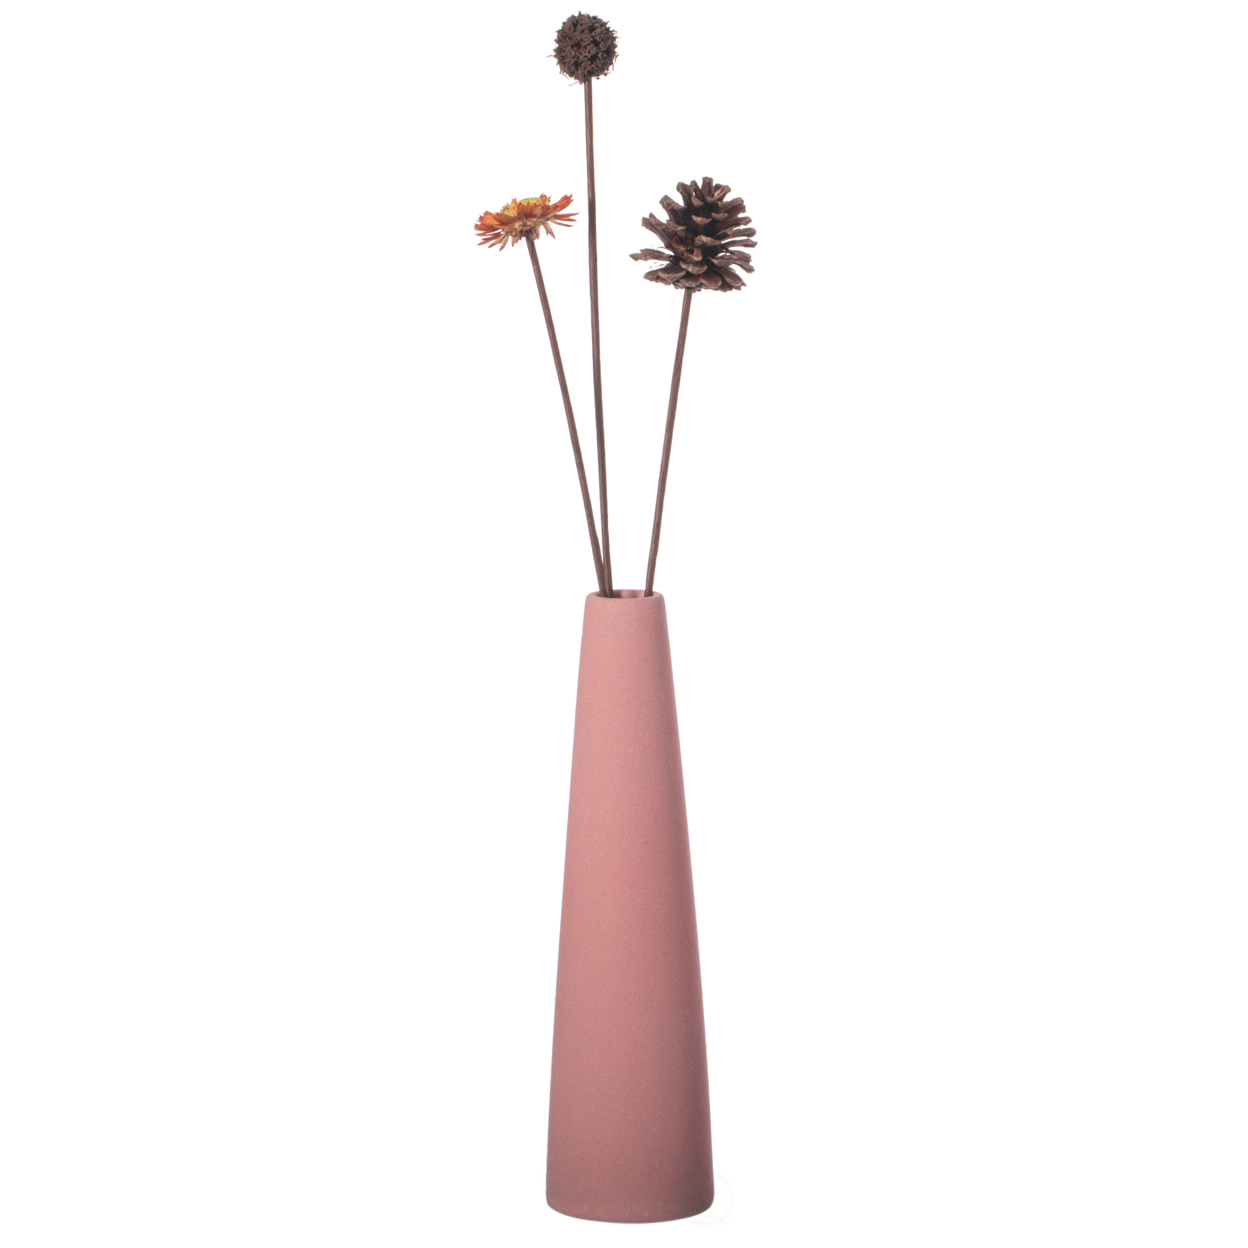 8 Inch Contemporary Ceramic Cone Shape Table Vase Modern Pastel Colored Flower Holder - Pink